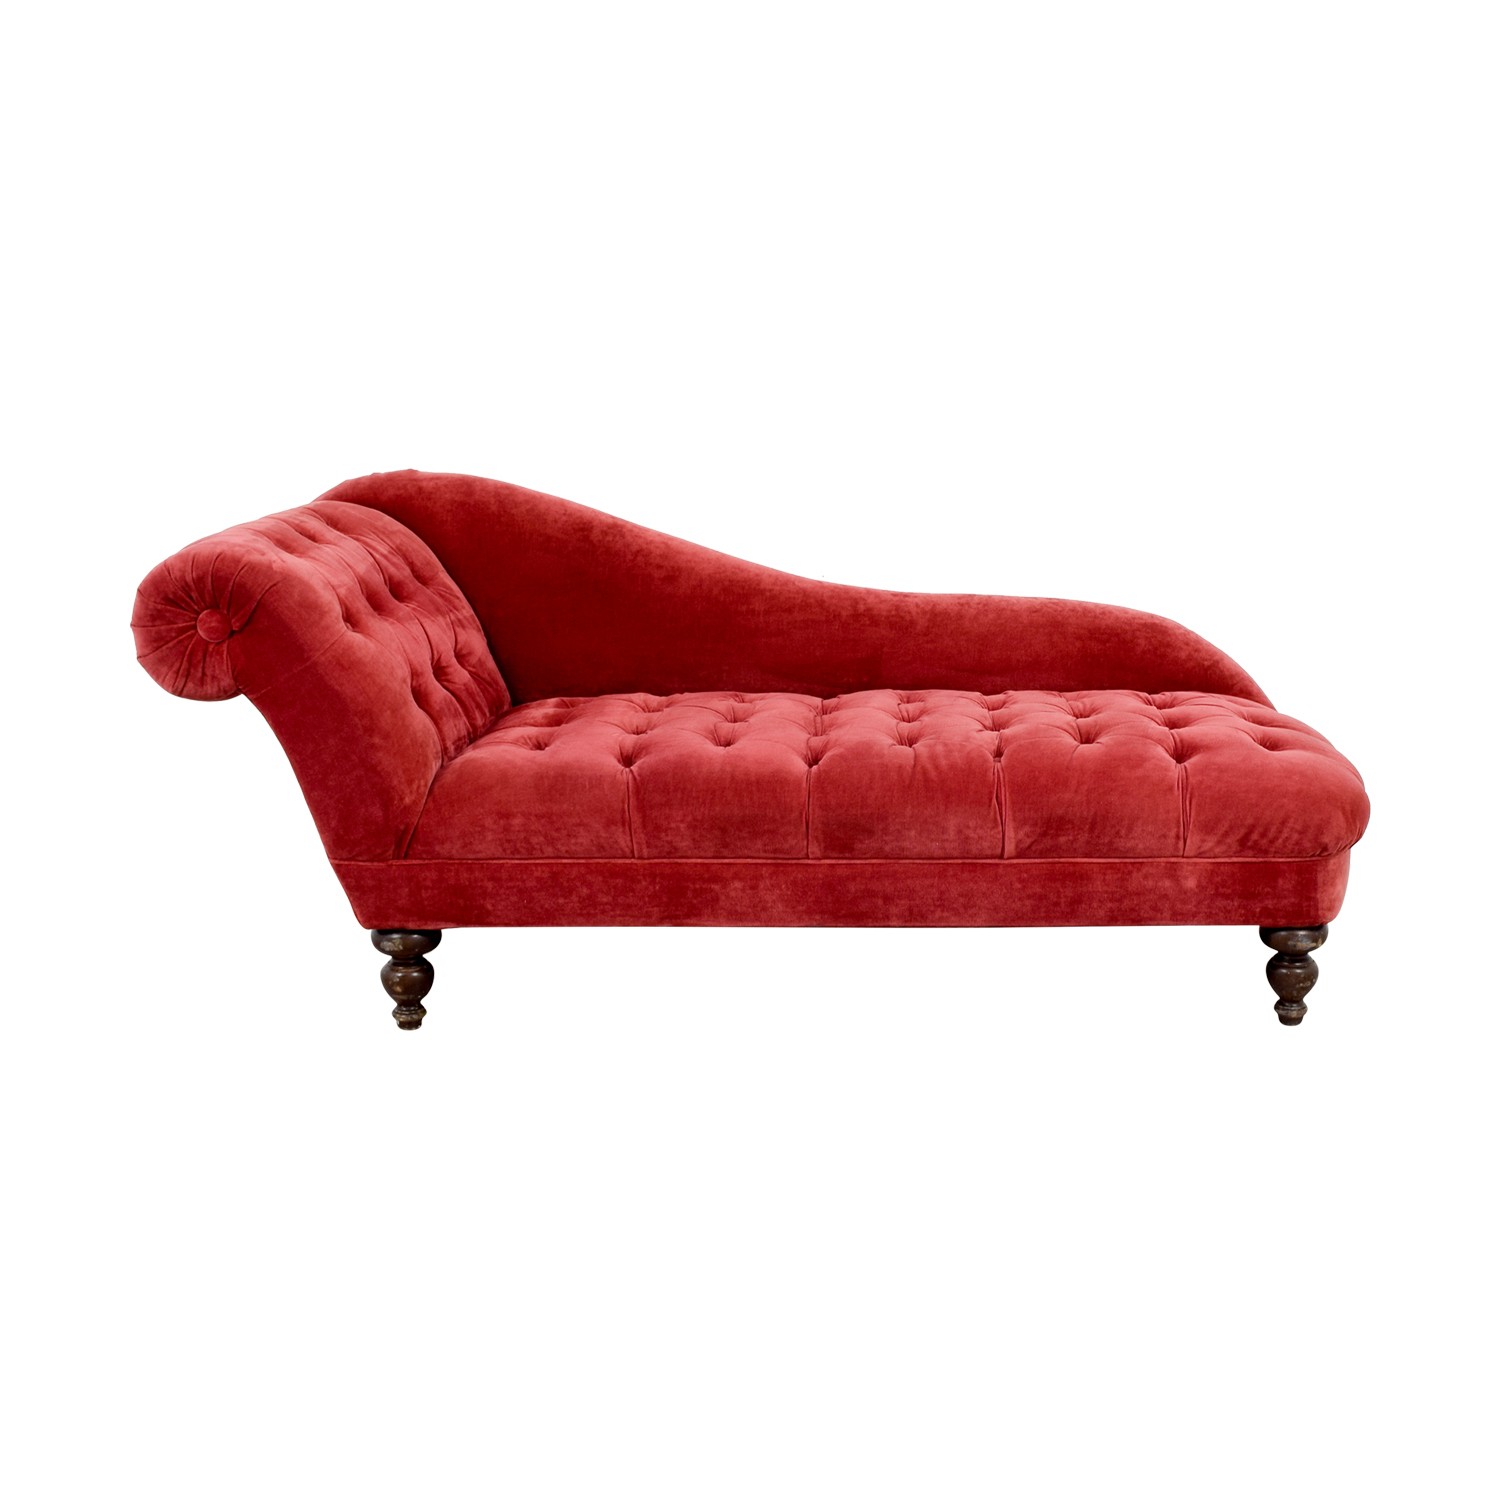 71 off domain home domain home furnishings red tufted 1